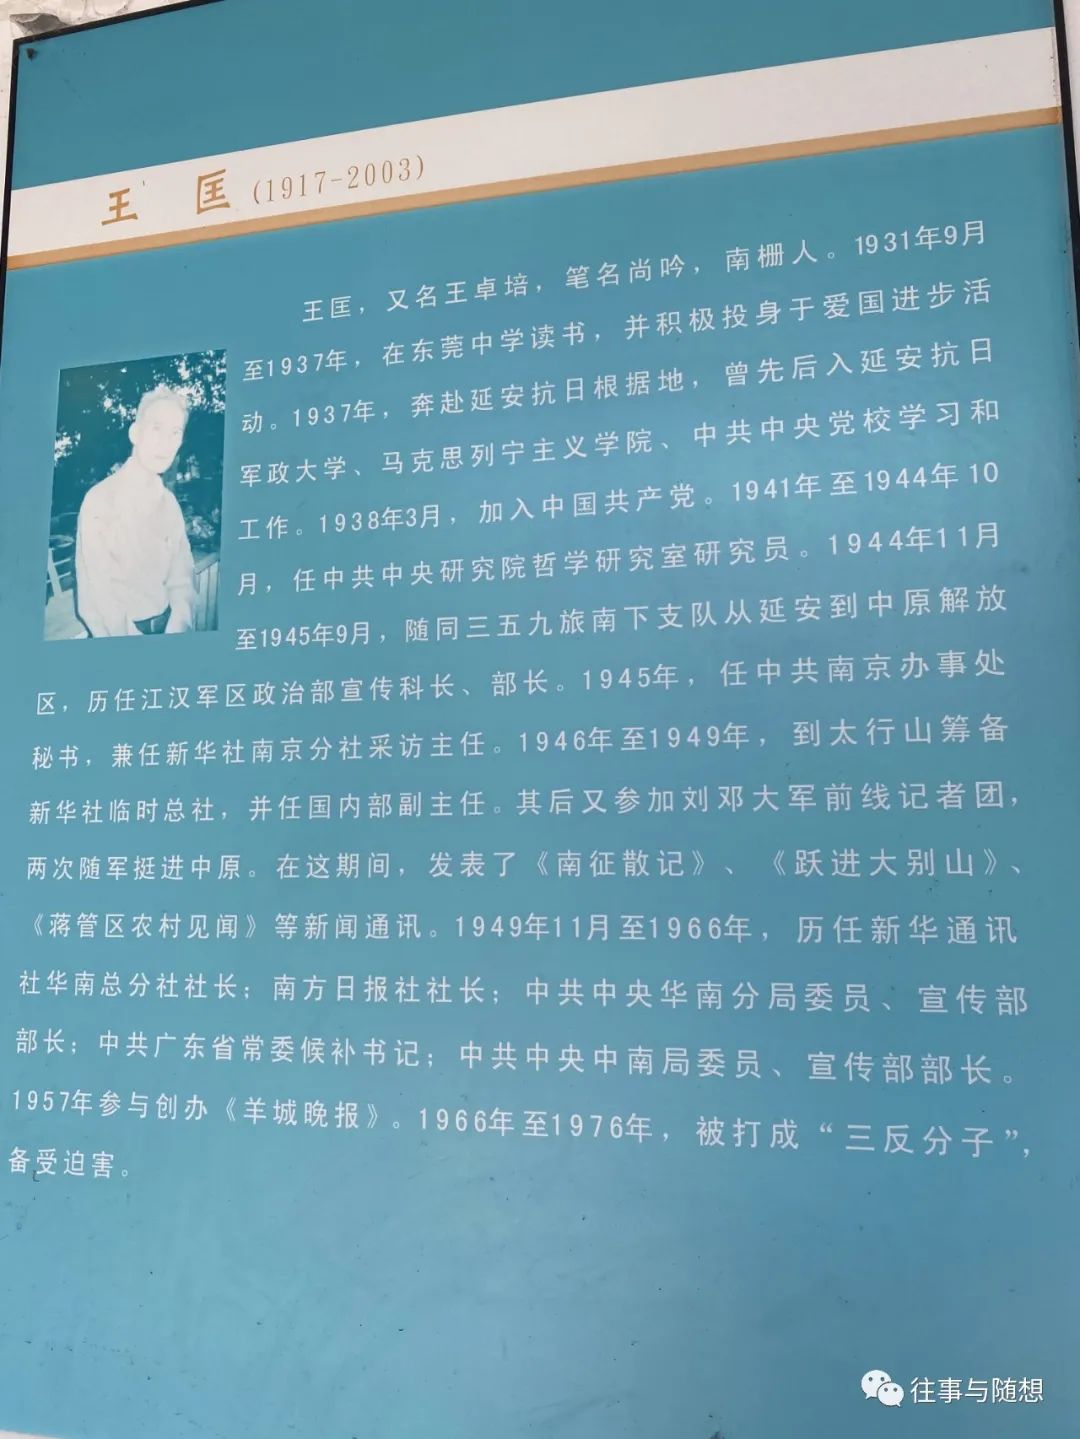 Blue poster with a photo of an elderly man and a lengthy biographical text in Chinese, which begins: Wang Kuang 1917 to 2003